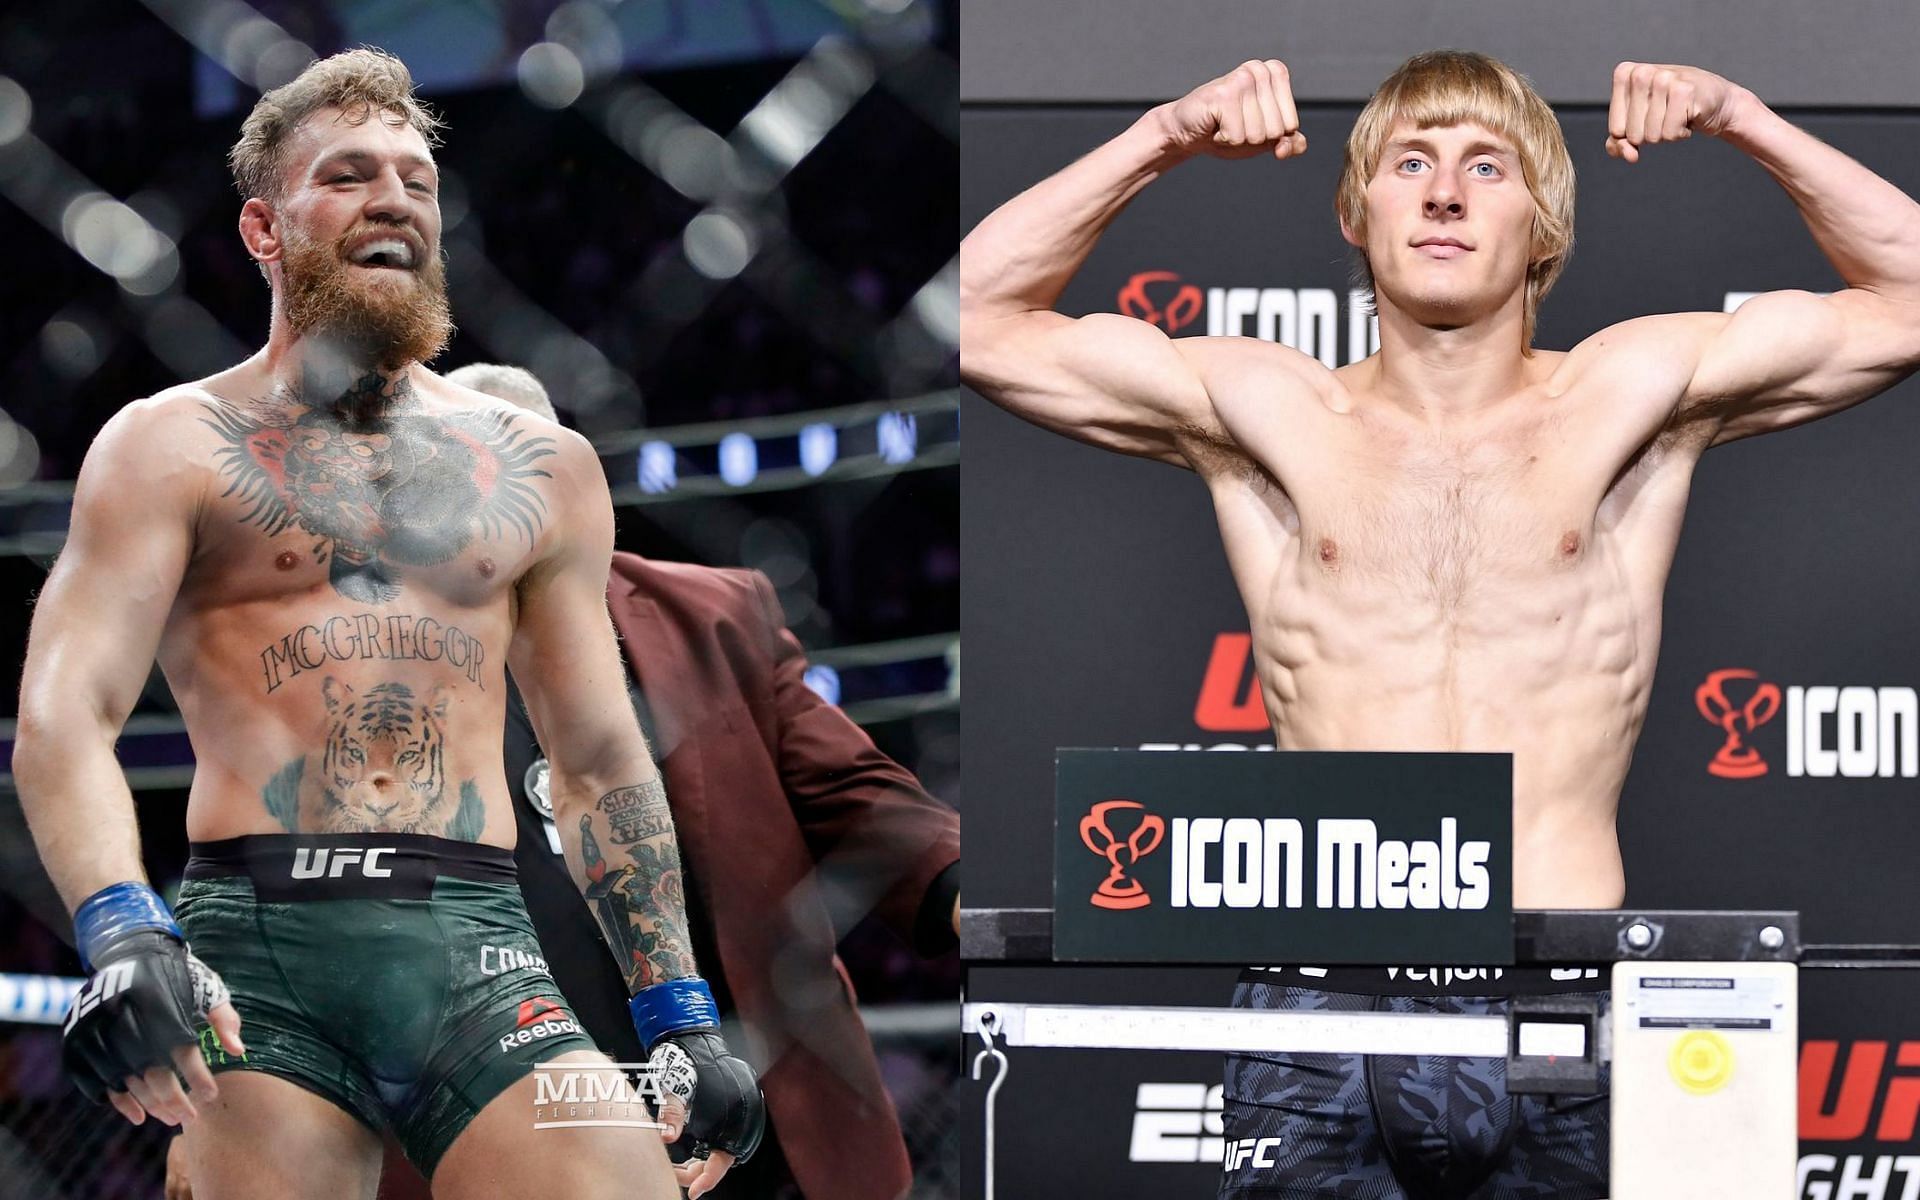 Will Conor McGregor (left) share the octagon with Paddy Pimblett (right) in the future?